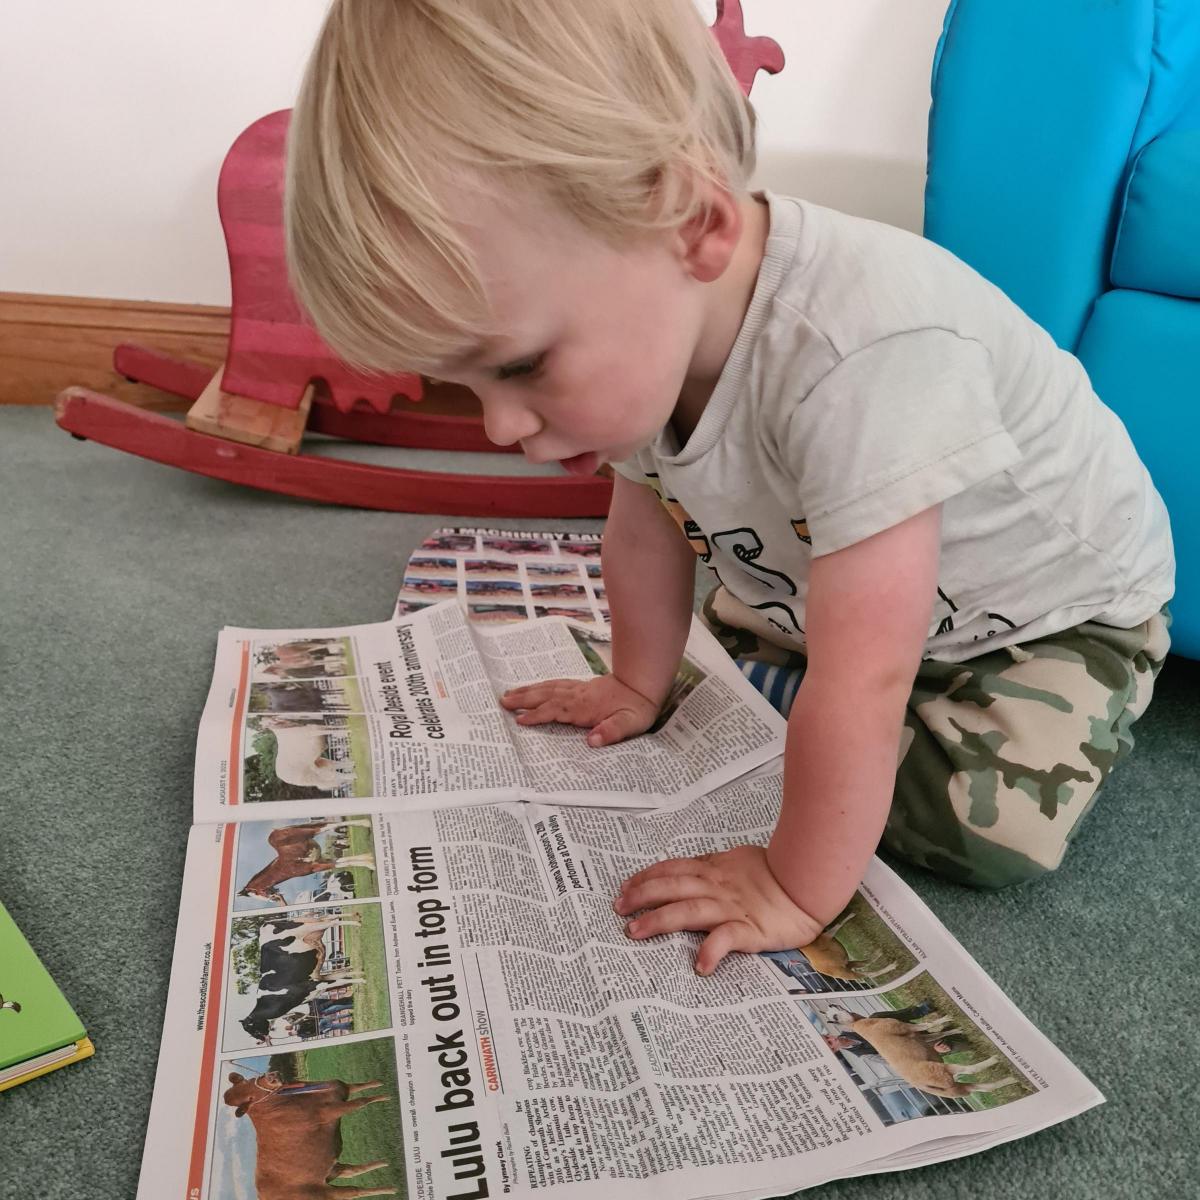 Hannah Pedgrift - Freddie Brown, 1 year old catching up on the news